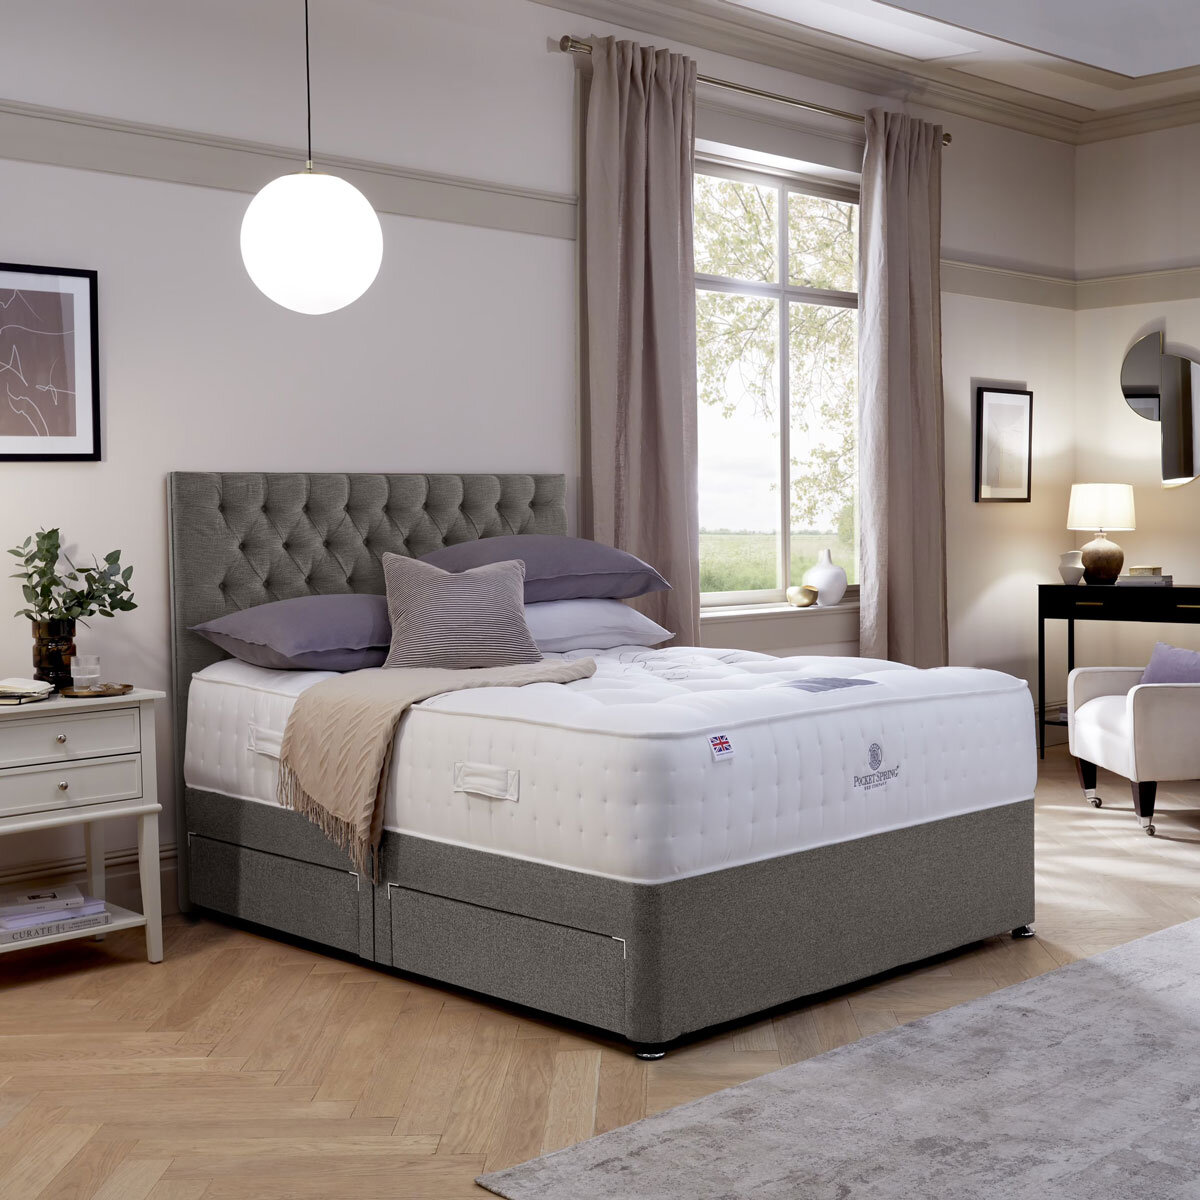 Pocket Spring Bed Company Mulberry Mattress & Pebble Grey Divan with 4 Drawers in 3 Sizes